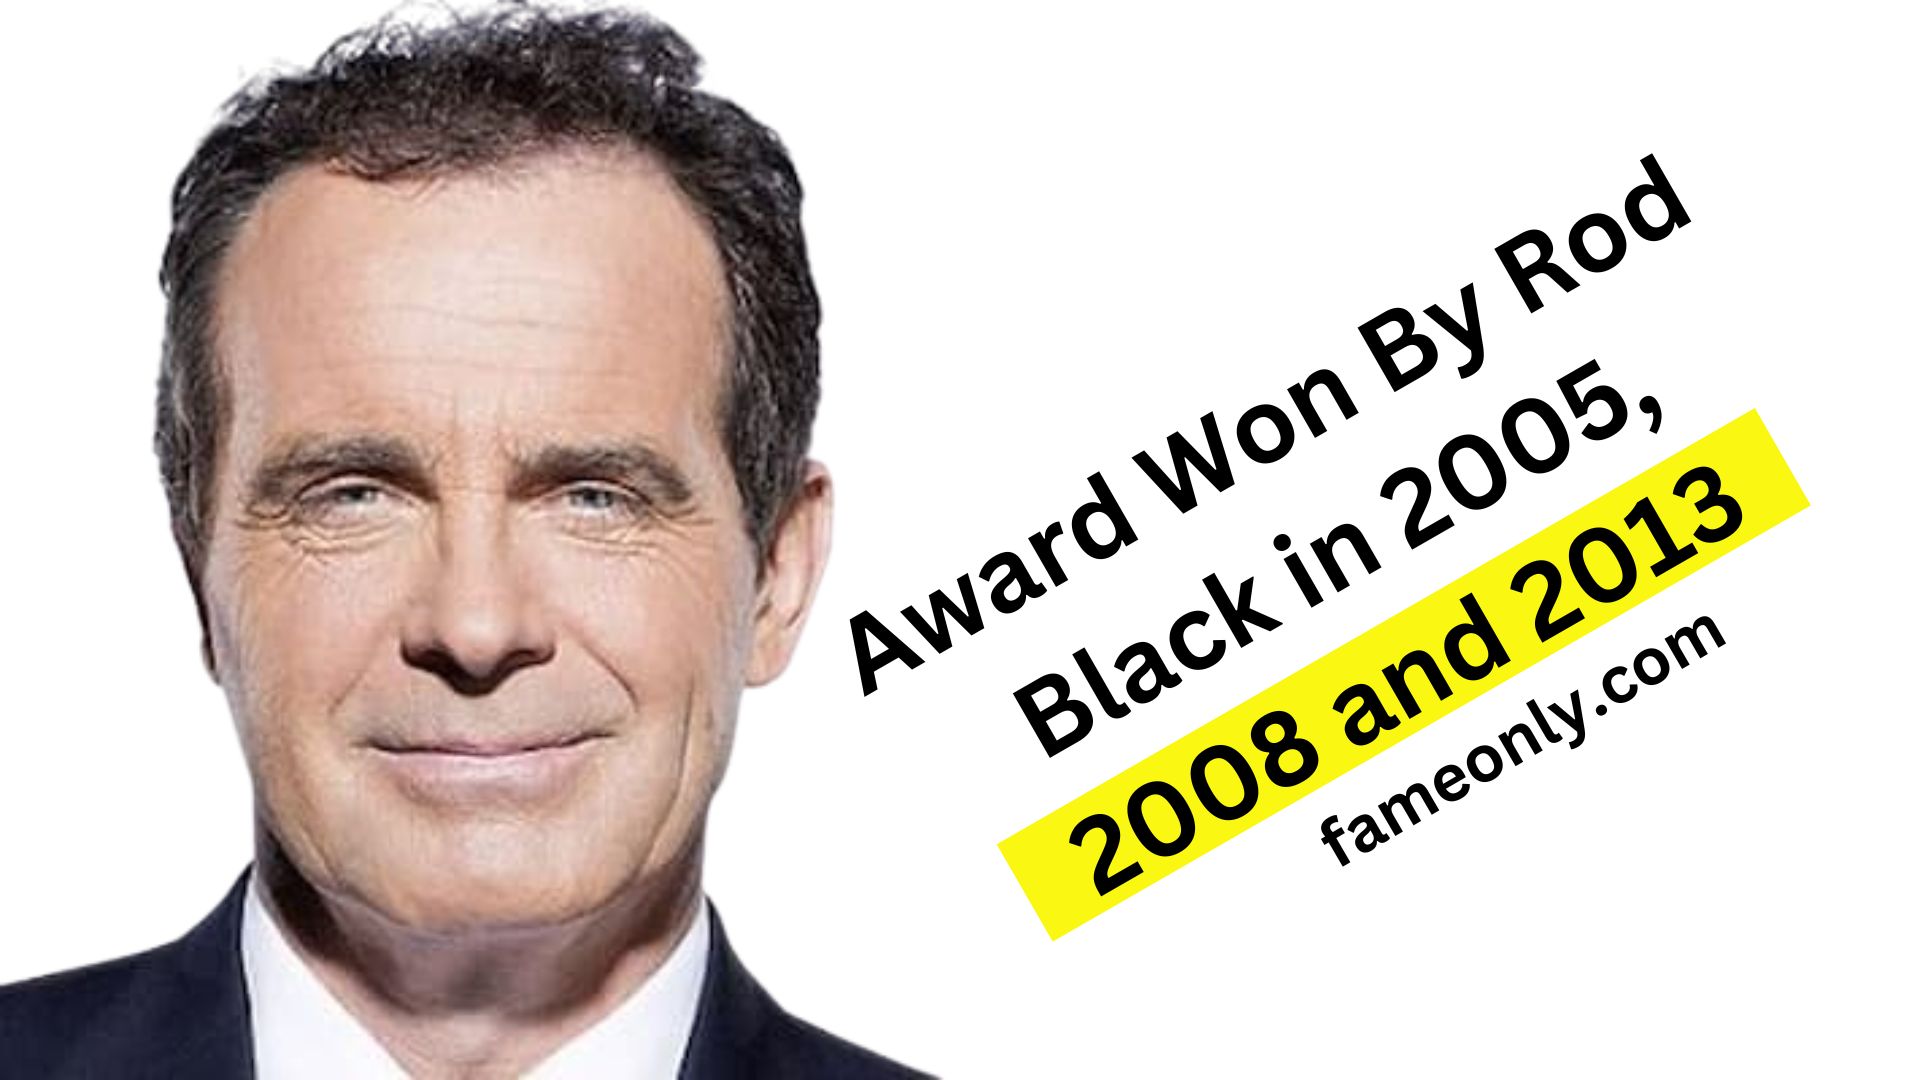 Award Won By Rod Black in 2005, 2008 and 2013